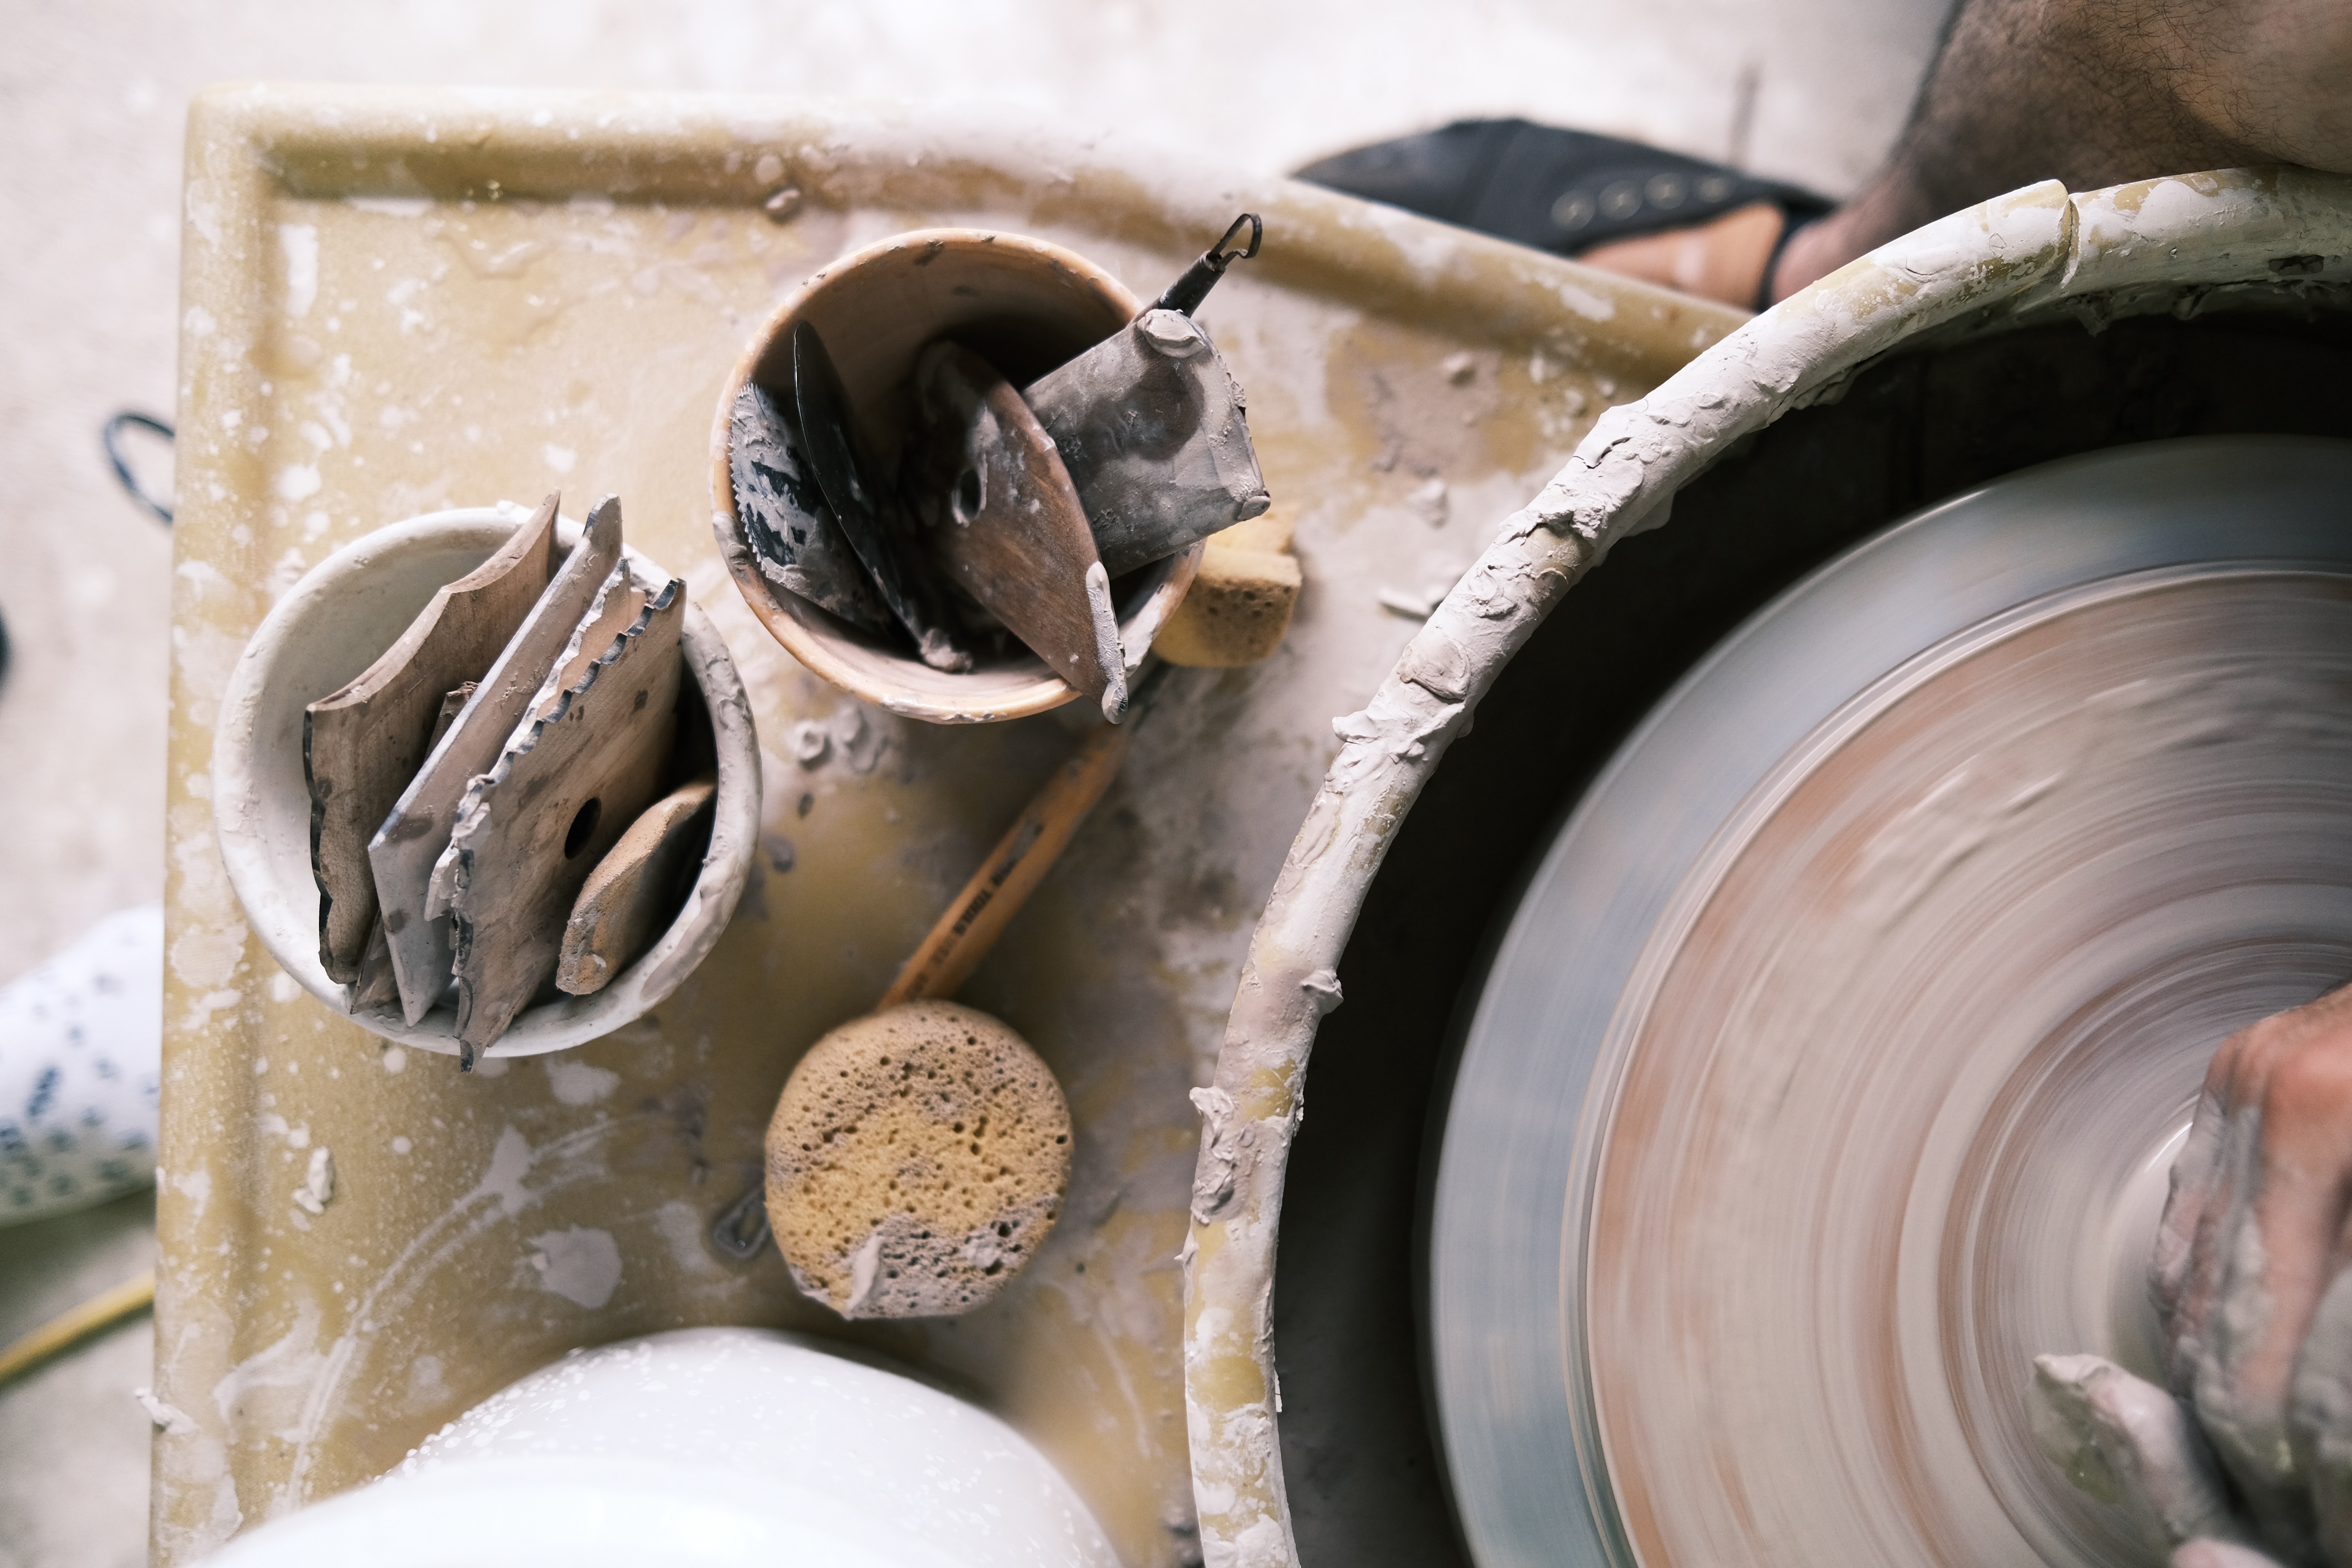 Pottery Wheel for Beginners – 14 Tips on Buying a Wheel